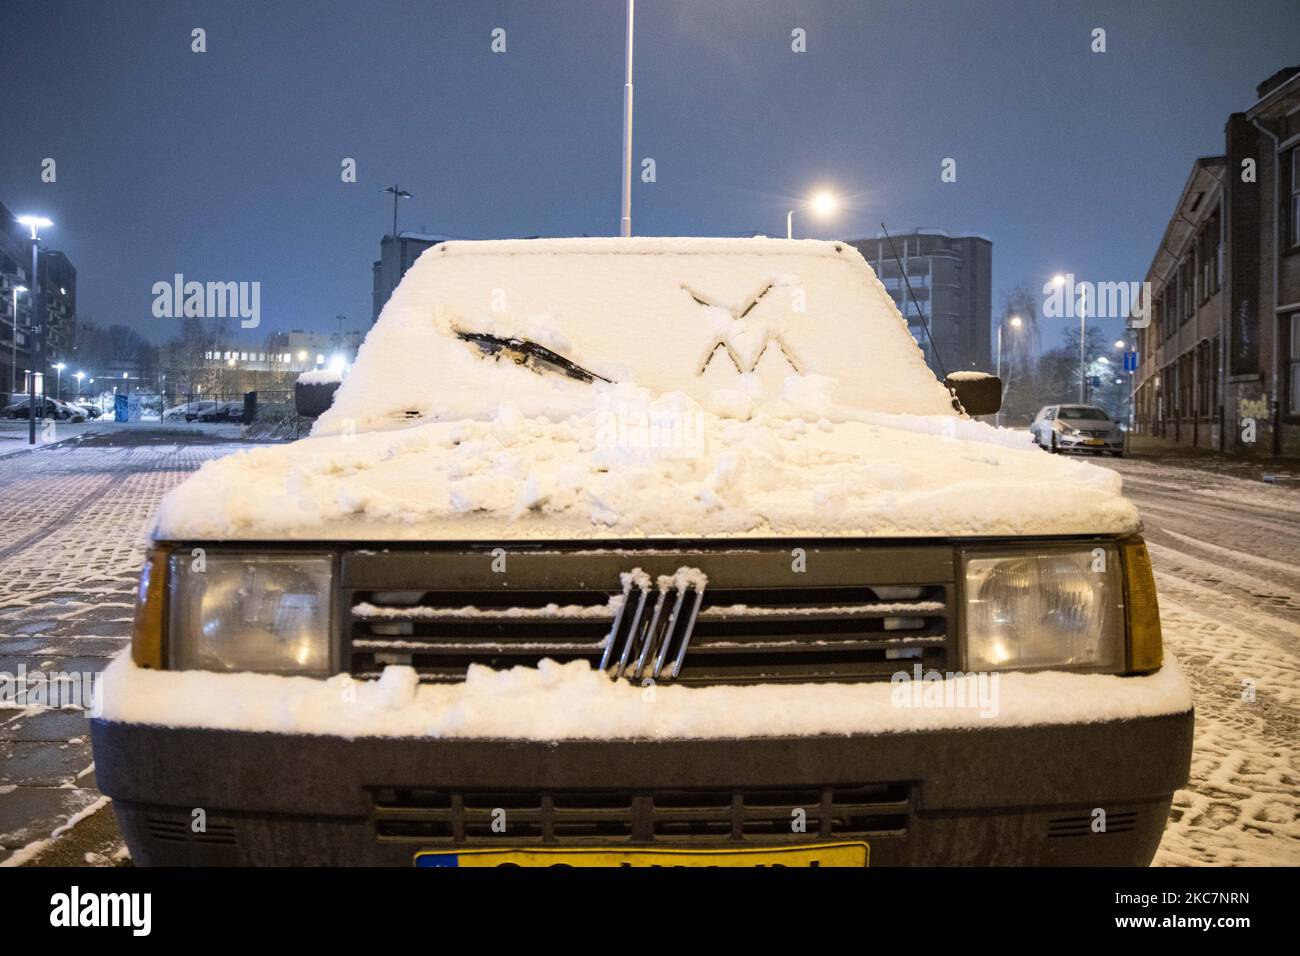 Snow covered cars in Eindhoven. Night long exposure photography images of snow-covered and illuminated with city lights Eindhoven city center after the snowfall. Daily life in the Netherlands with the first snowfall of the year covering almost everything the cold weather shows subzero temperature. The chilly condition with snow and ice changed soon according to the forecast, the freezing condition will not last more than a day. Eindhoven, the Netherlands on January 16, 2020 (Photo by Nicolas Economou/NurPhoto) Stock Photo